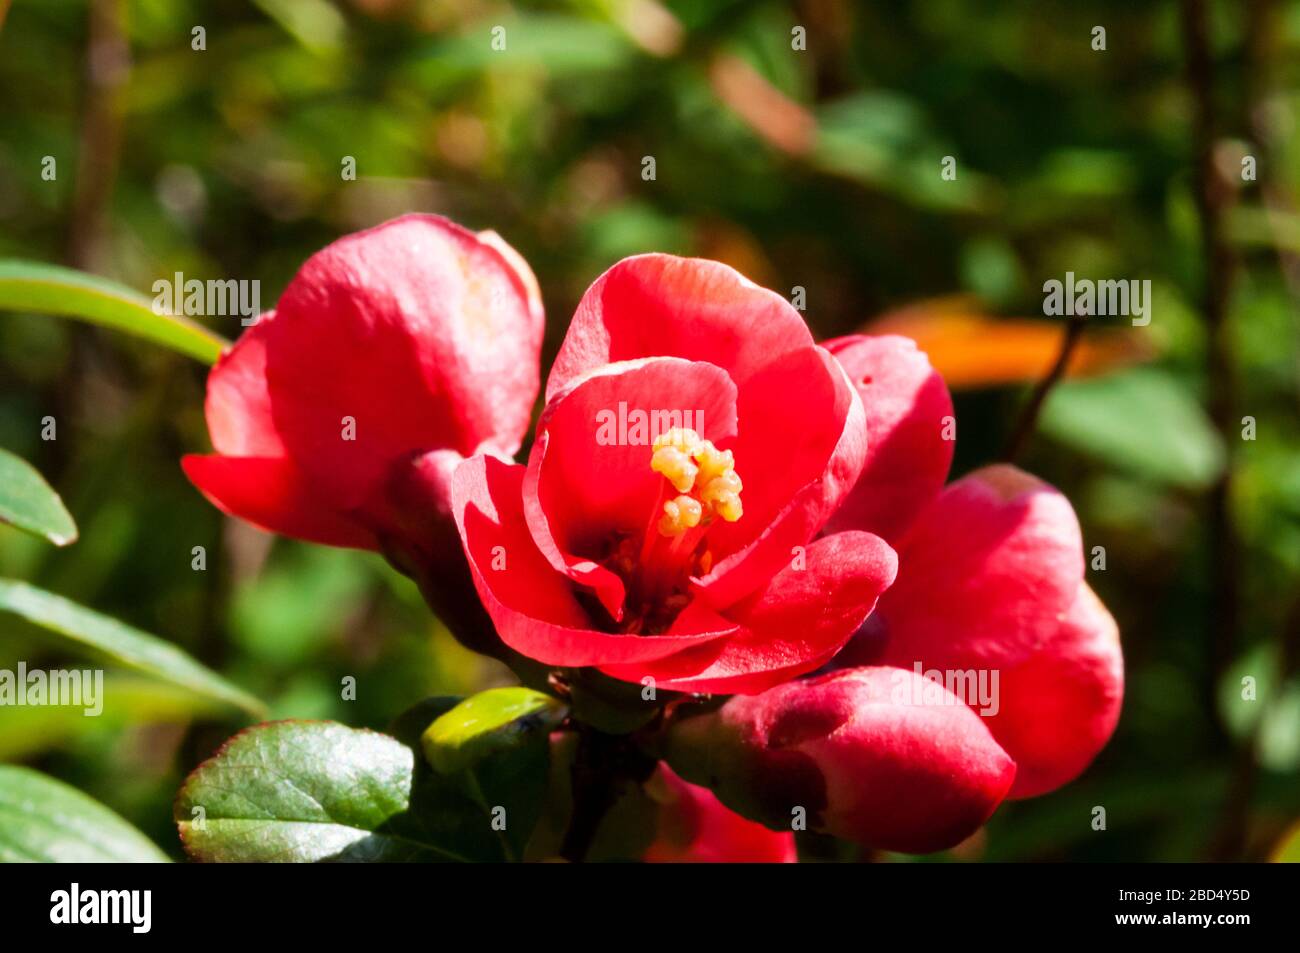 Flower of  Japanese quince, Chaenomeles japonica. Stock Photo